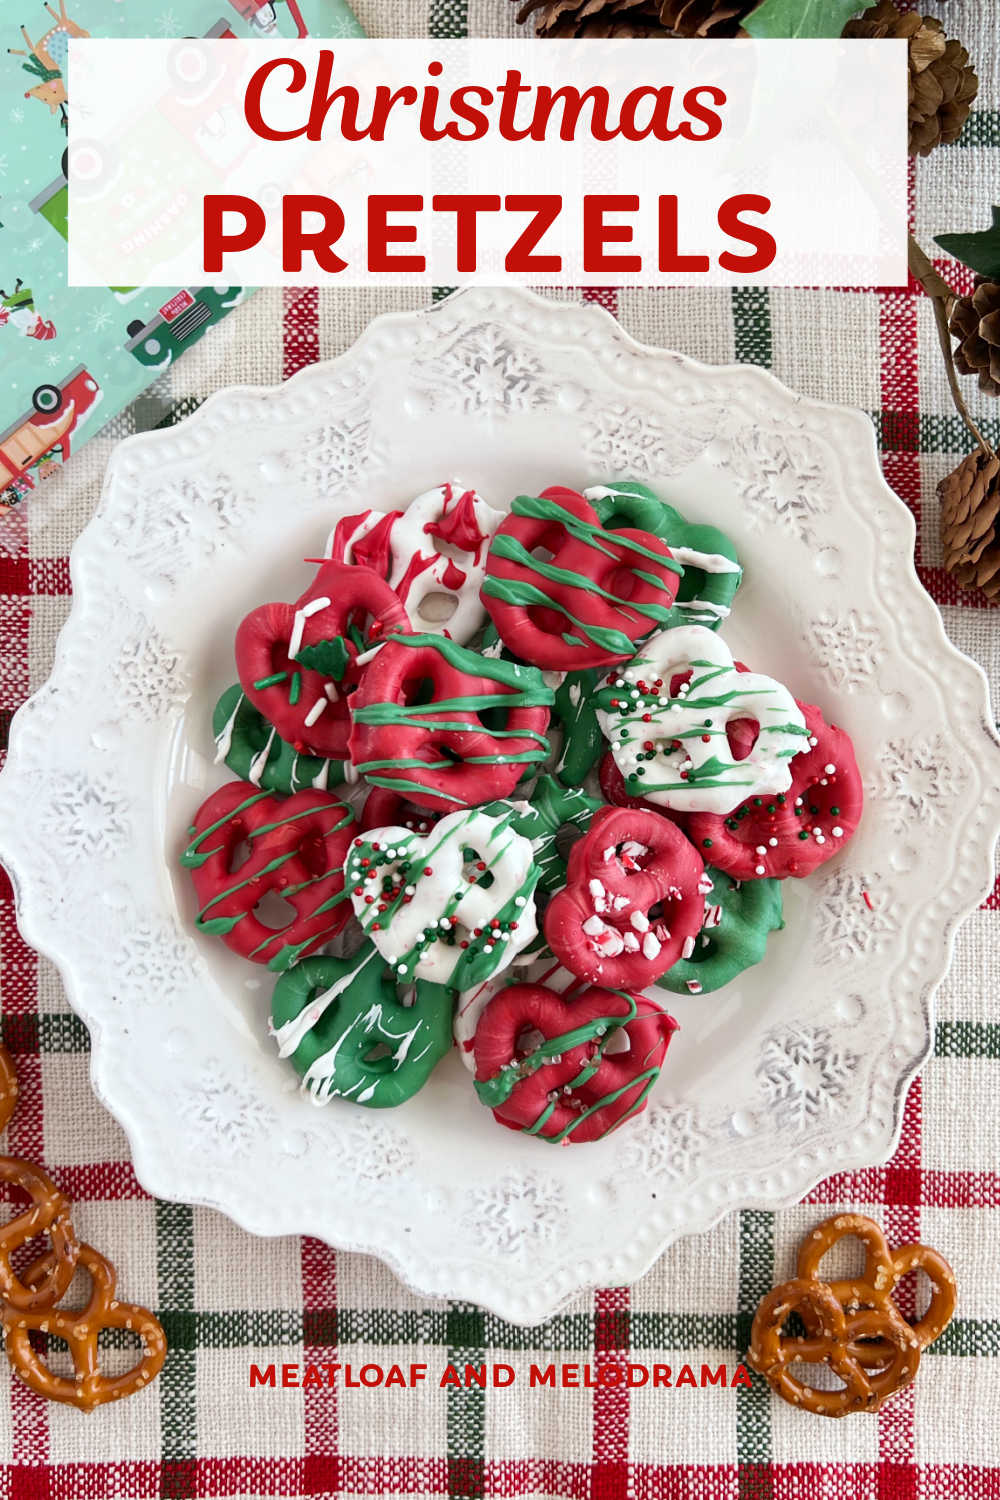 Chocolate Dipped Christmas Pretzels are mini pretzels covered in melted chocolate or candy coating. Chocolate covered pretzels are an easy treat for the holiday season and perfect for sharing with friends and neighbors! via @meamel